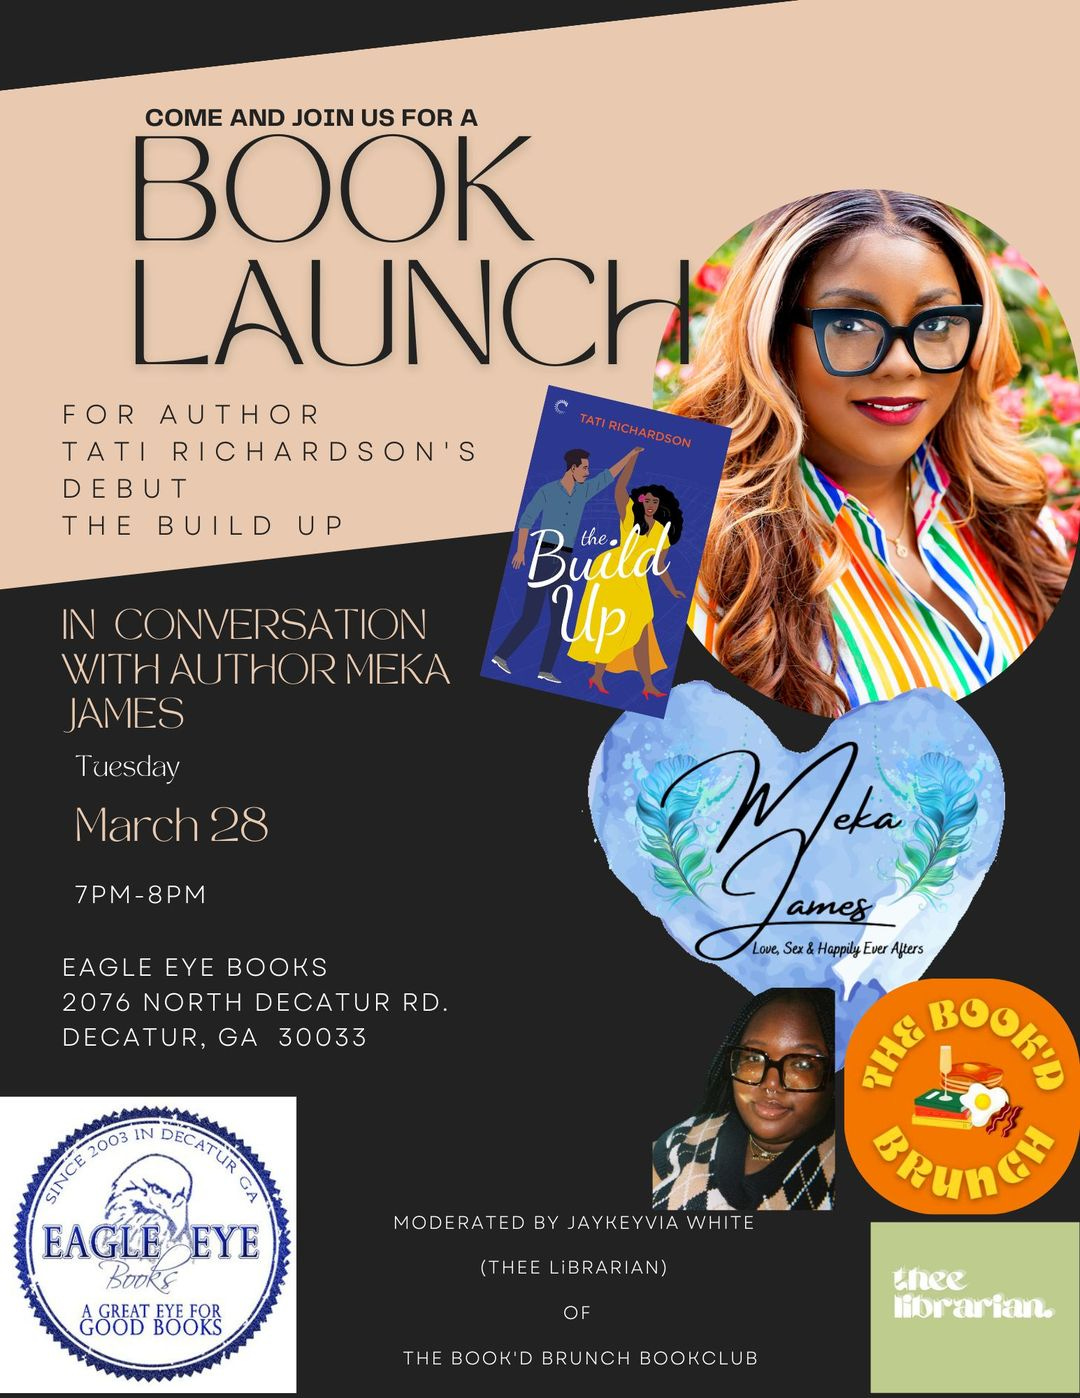 May be an image of 2 people, book and text that says 'COME AND JOIN BOOK US FOR A LAUNCH FOR AUTHOR TATI RICHARDSON'S DEBUT THE BUILD UP Build Up IN CONVERSATION WITHAUTHORMEKA JAMES Tuesday March28 7PM -8PM EAGLE EYE BOOKS 2076 NORTH DECATUR RD. DECATUR, GA 30033 Ya ames Love, &Happily Ever Afters ሚድ BOOKD BRUnGH 2003 N DECATUR SUNCE EAGLE EAGLEKEYE Book GOOAT BOORE MODERATED BY JAYKEYVIA WHITE (THEE BRAR (AN) AN) THE BOOK BRUNCH BOOKCL JB thee librarian.'